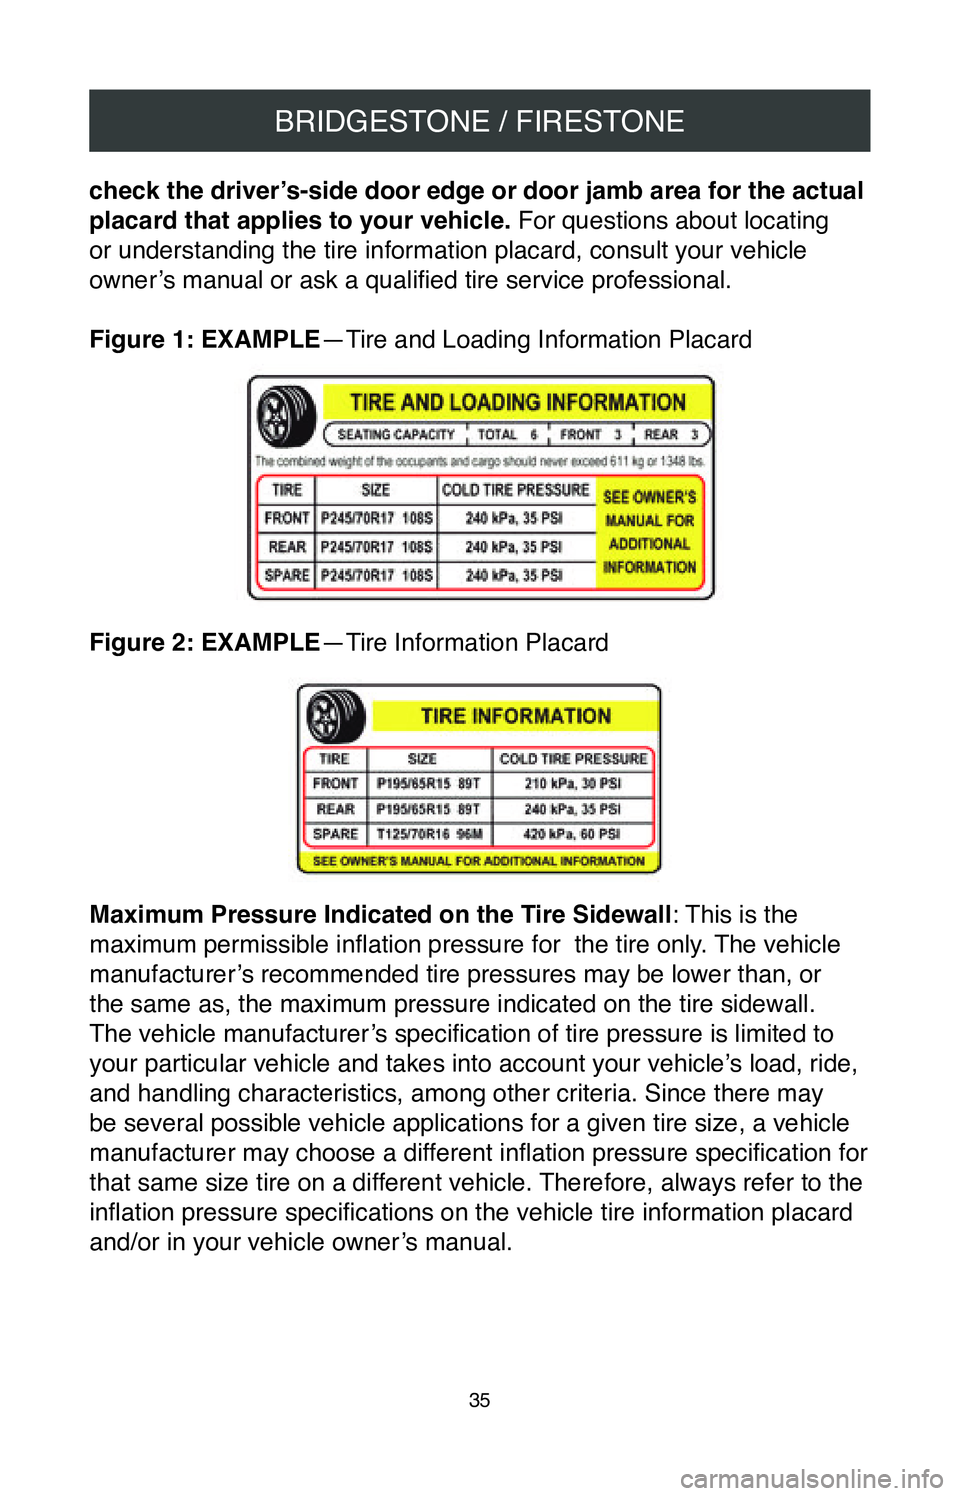 TOYOTA PRIUS 2020  Warranties & Maintenance Guides (in English) BRIDGESTONE / FIRESTONE
35
check the driver’s-side door edge or door jamb area for the actual 
placard that applies to your vehicle. For questions about locating 
or understanding the tire informati